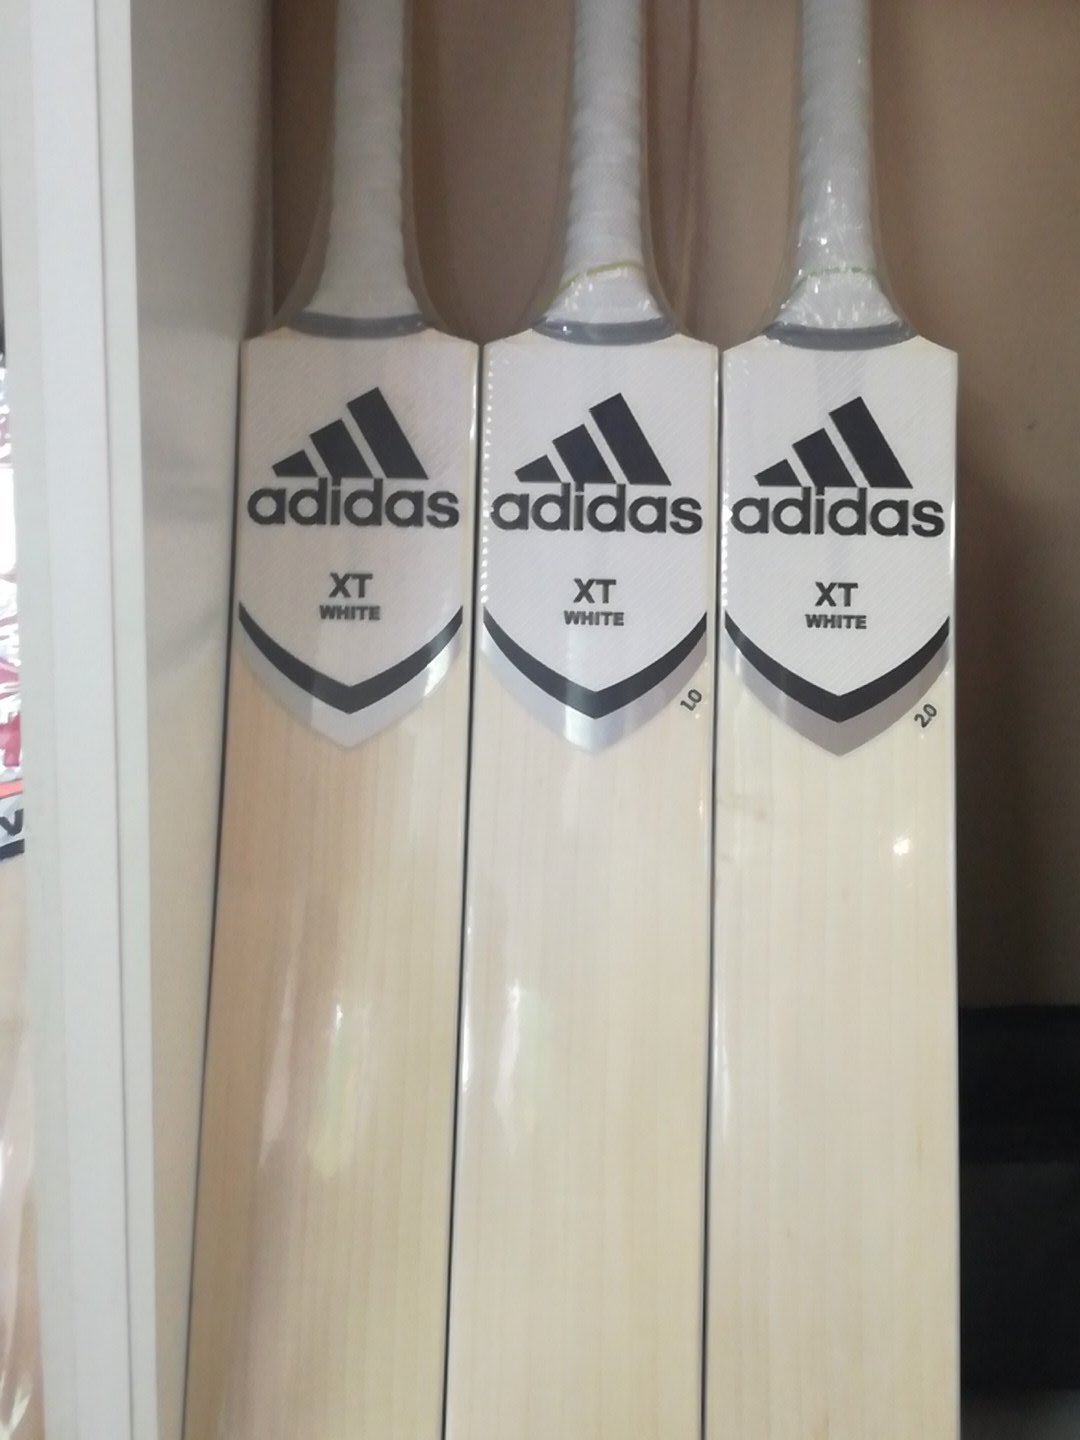 Expulsar a Tomar medicina atributo Centurion Cricket Co on Twitter: "Limited stock available of the Adidas  2018 XT white range at Centurion Cricket Company, available At Supersport  Park only. https://t.co/x6wzMigW2l" / Twitter